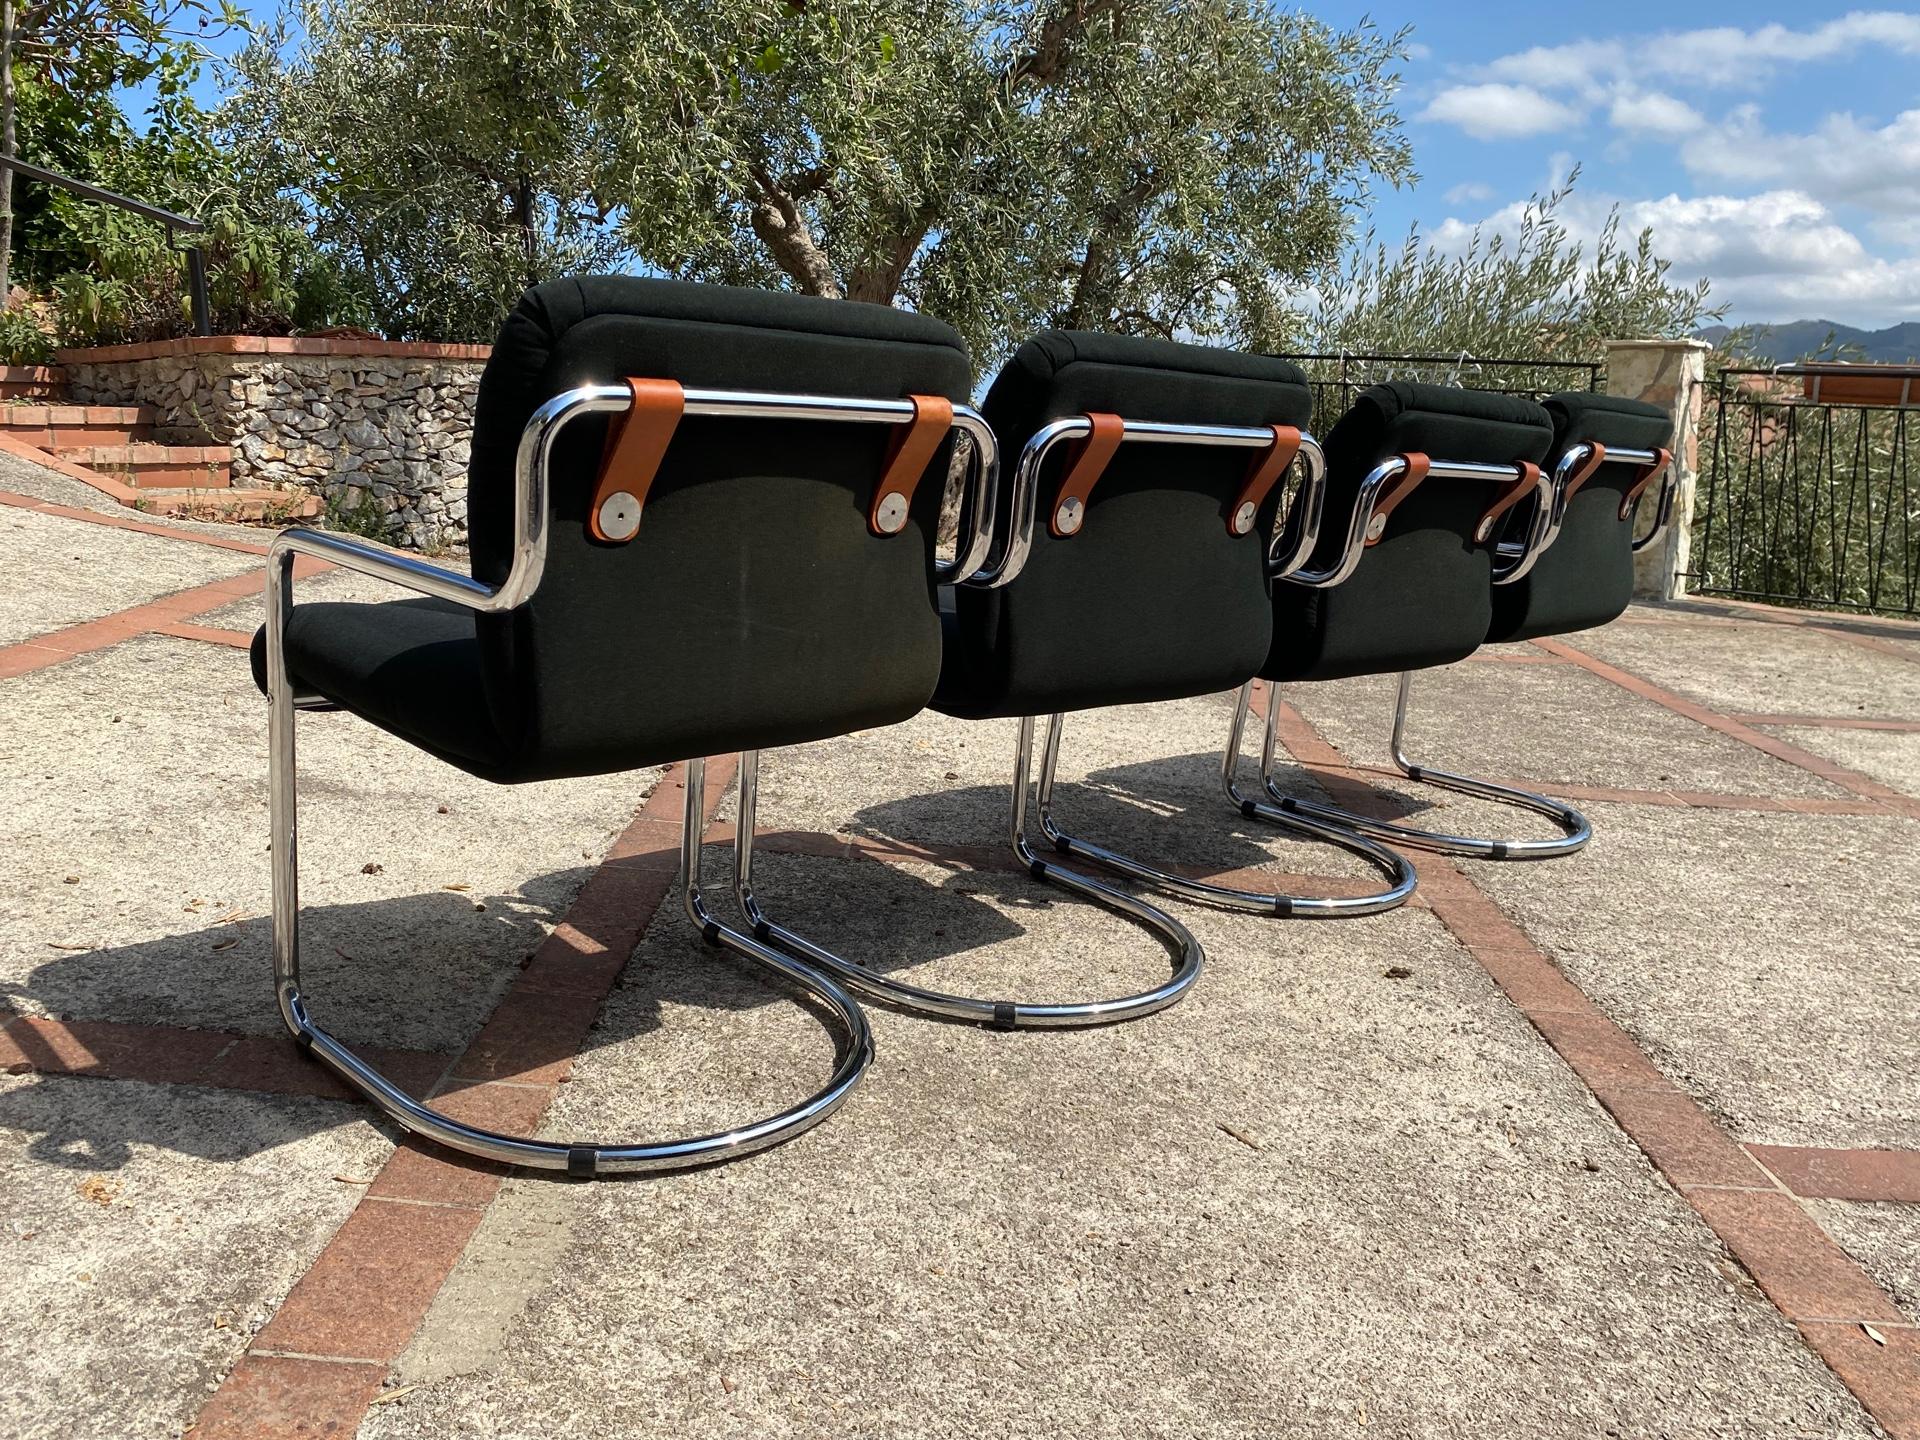 Currently, the most coveted dining chairs by interior designers are these chairs by Guido Faleschini for Hermès.
Condition: Good good original condition, the chrome part, the seat and the leather straps are intact as shown in the photos.